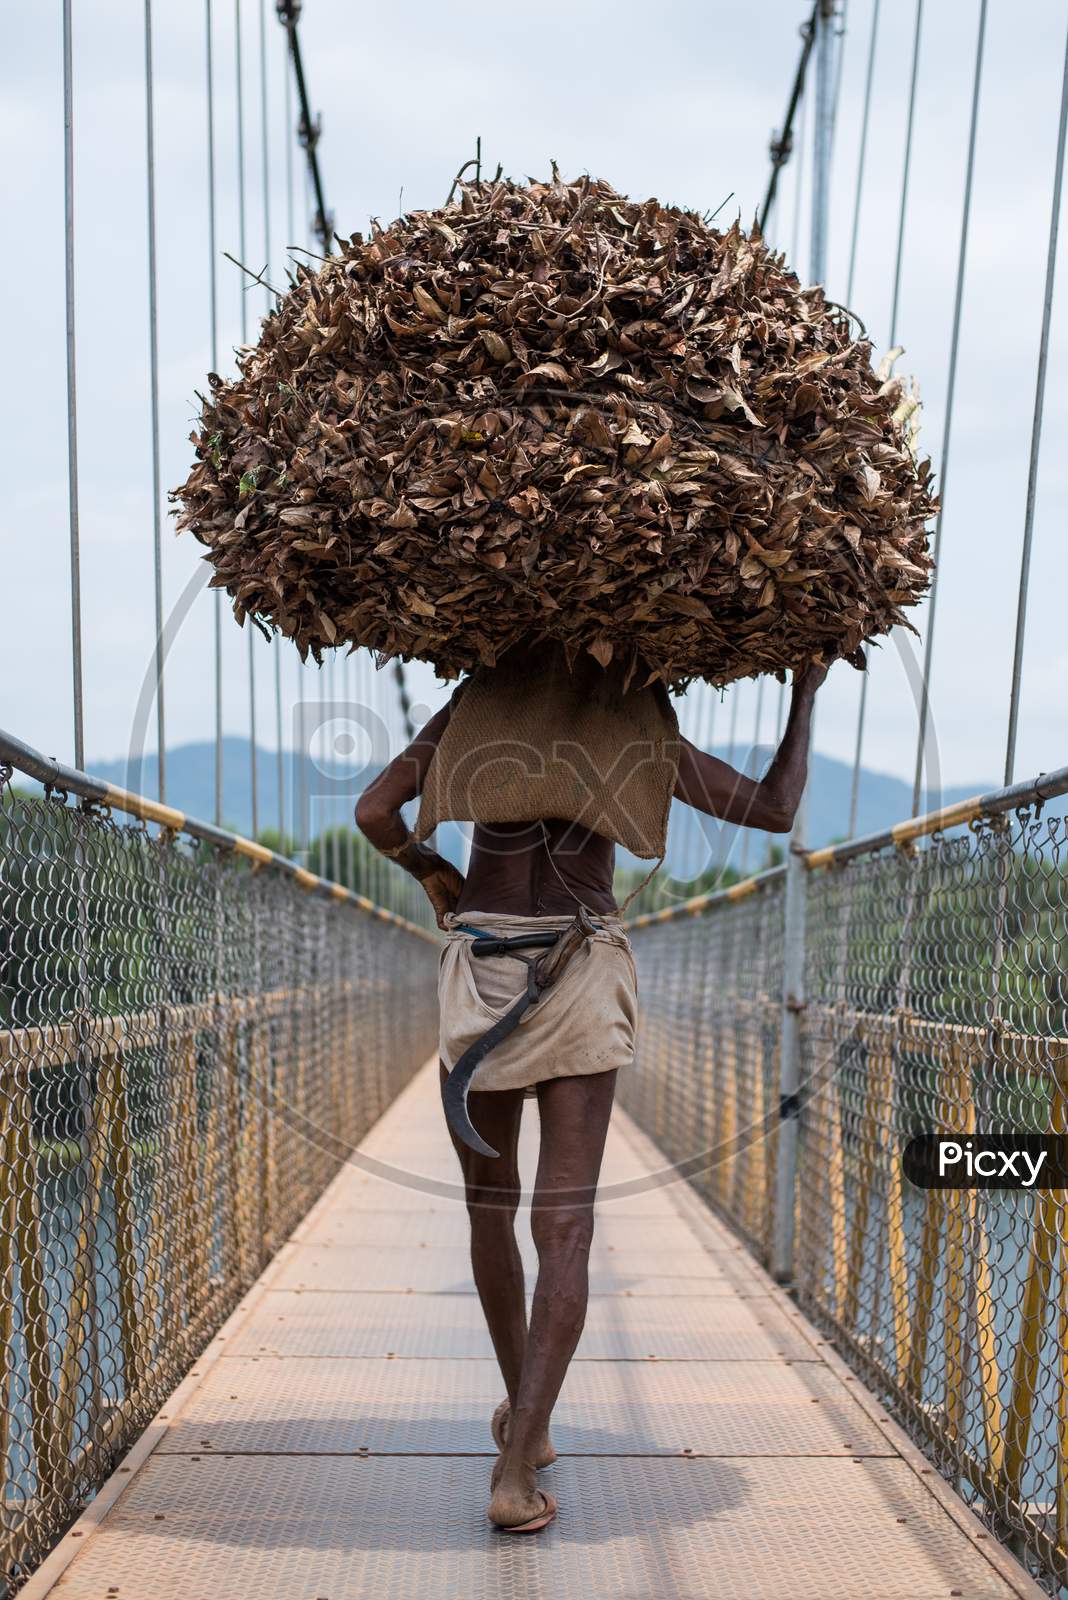 An old man carrying firewood and dried leaves on a suspension bridge